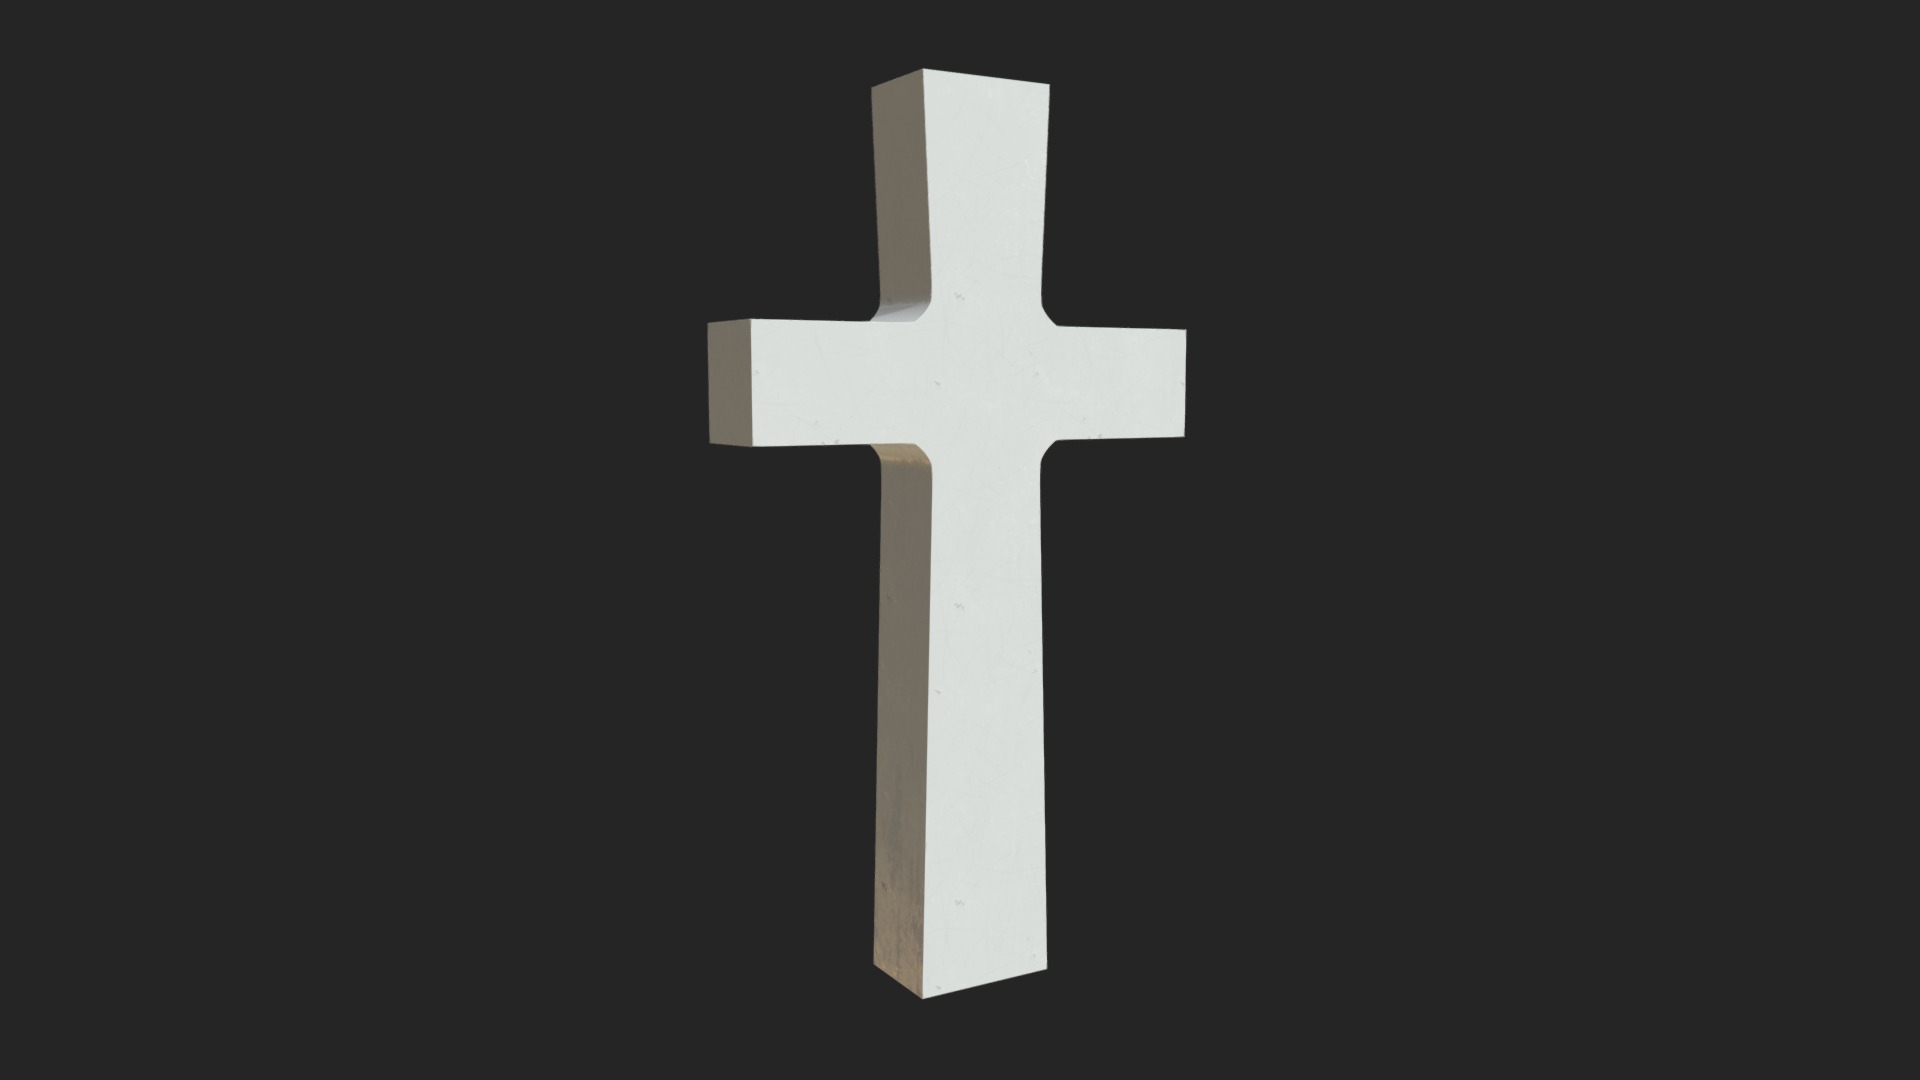 3D model War memorial gravestone – Cross - This is a 3D model of the War memorial gravestone - Cross. The 3D model is about a white cross on a black background.